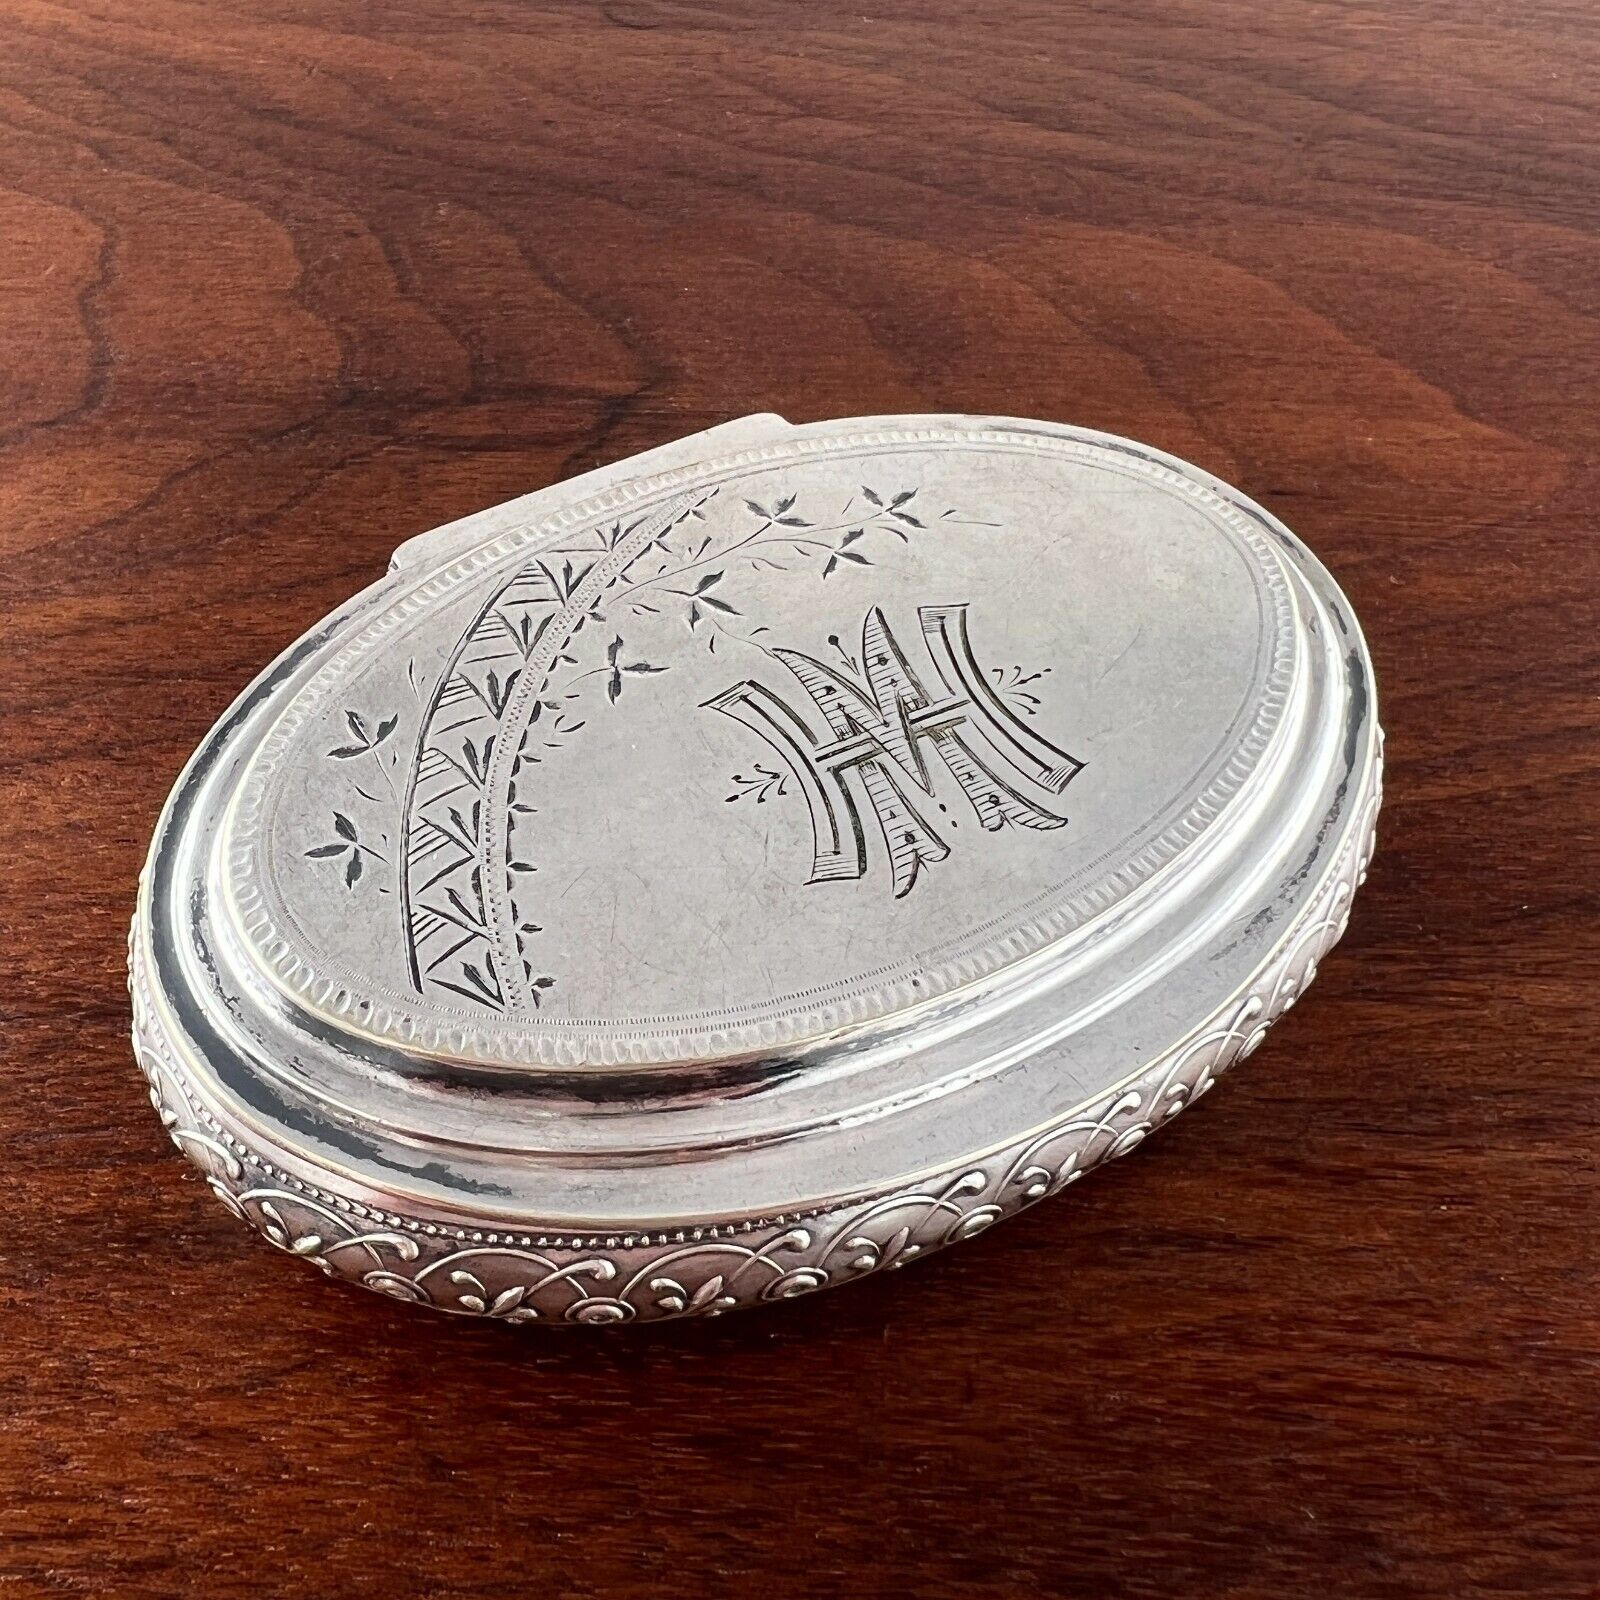 LARGE WHITING AMERICAN AESTHETIC COIN SILVER SNUFF BOX BRIGHT CUT FLORAL 1870S